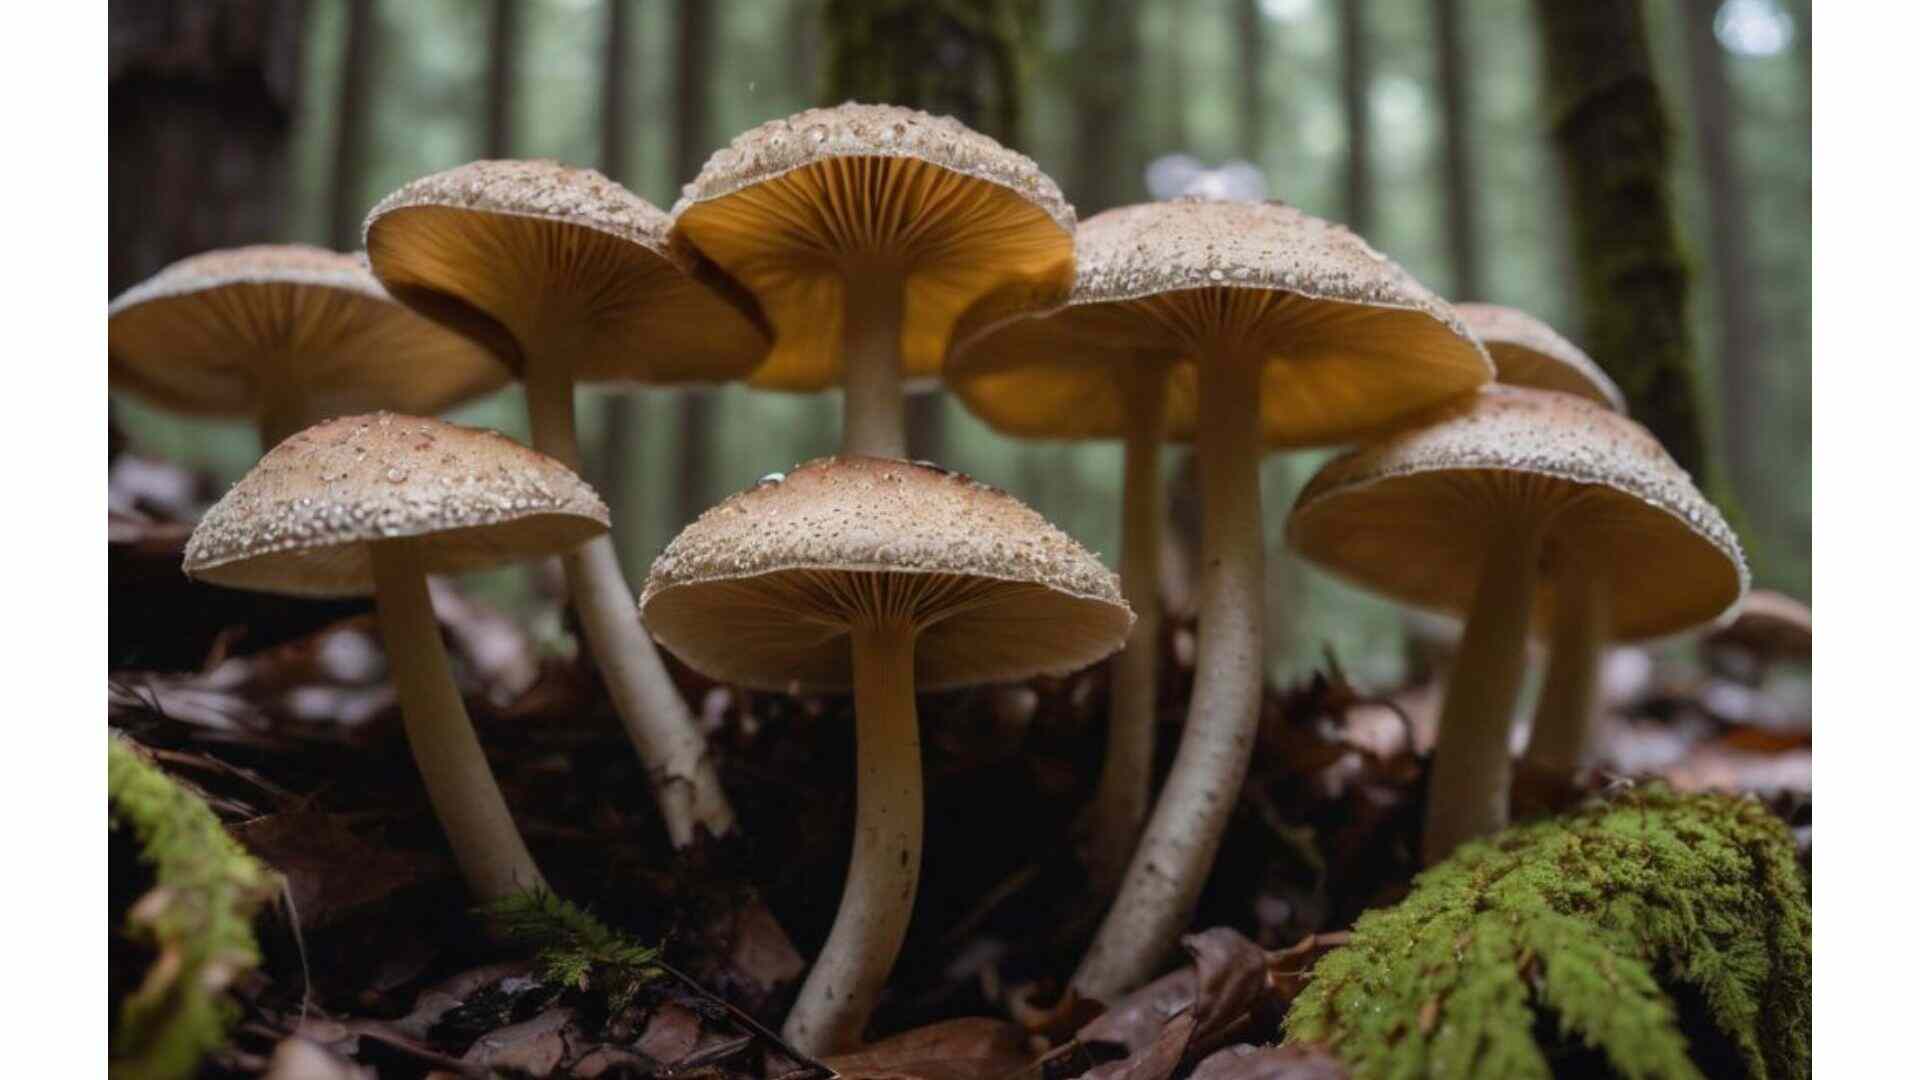 Meghalaya: Three Died And Several Critical Due To Poisonous Mushrooms